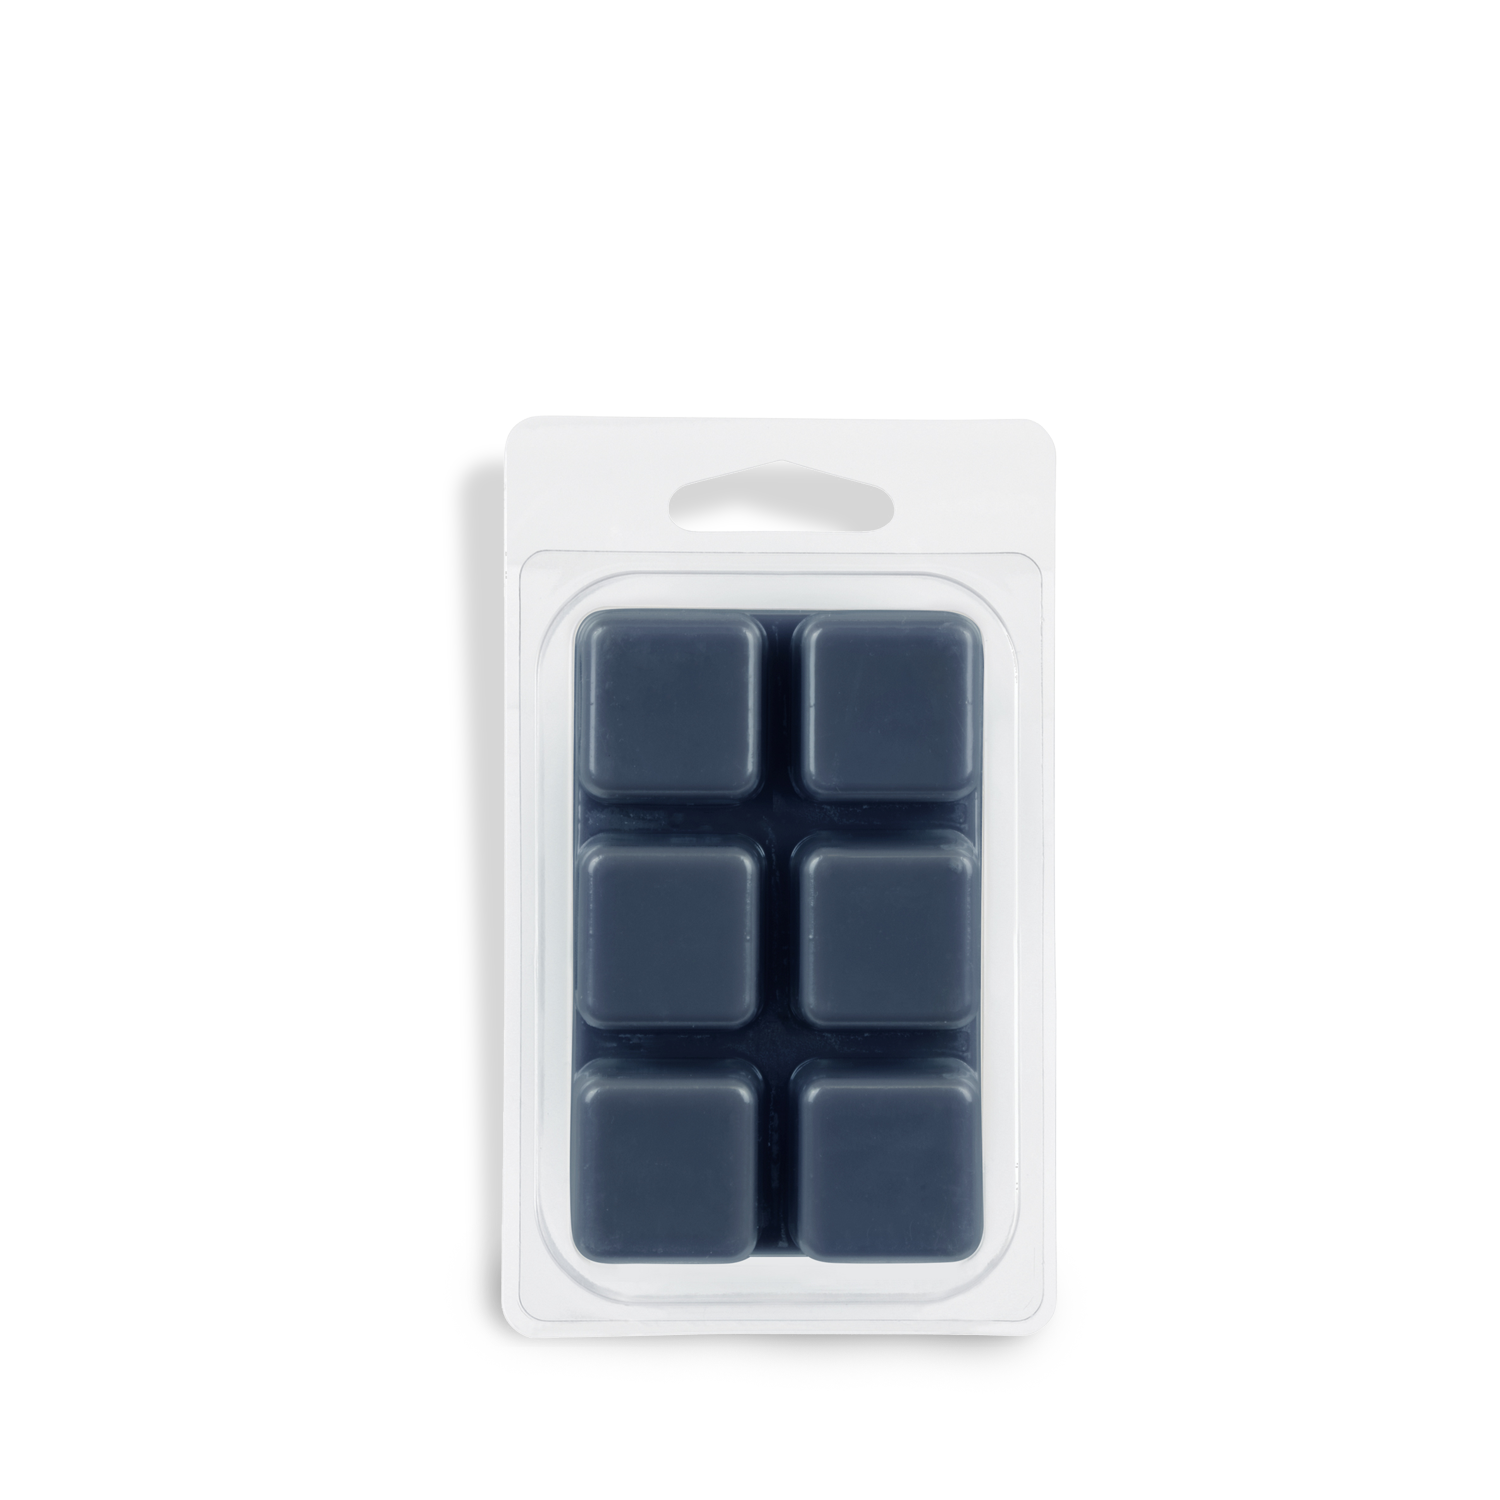 A pack of Tuscany Candle® EVD Washed Beachwood Scented Wax Melt (2.5 oz) cubes in a package.